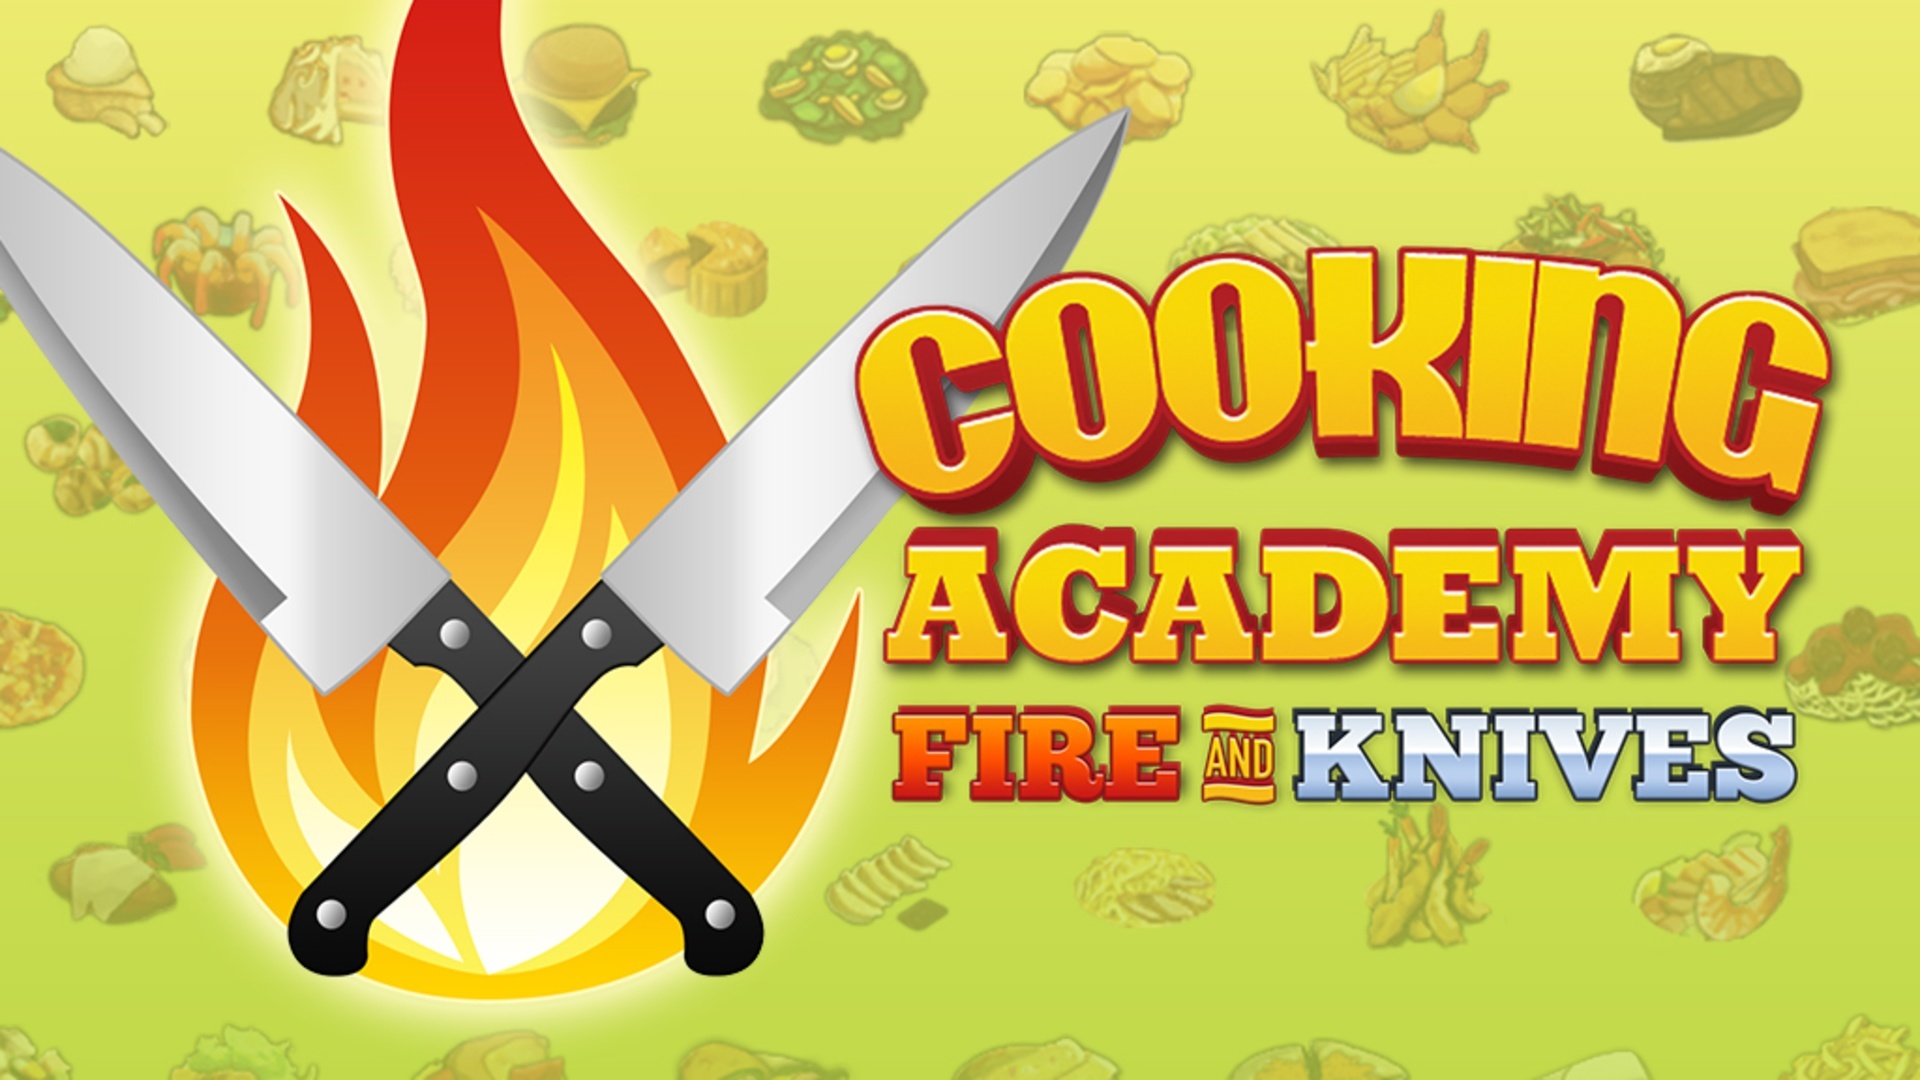 cooking academy for pc